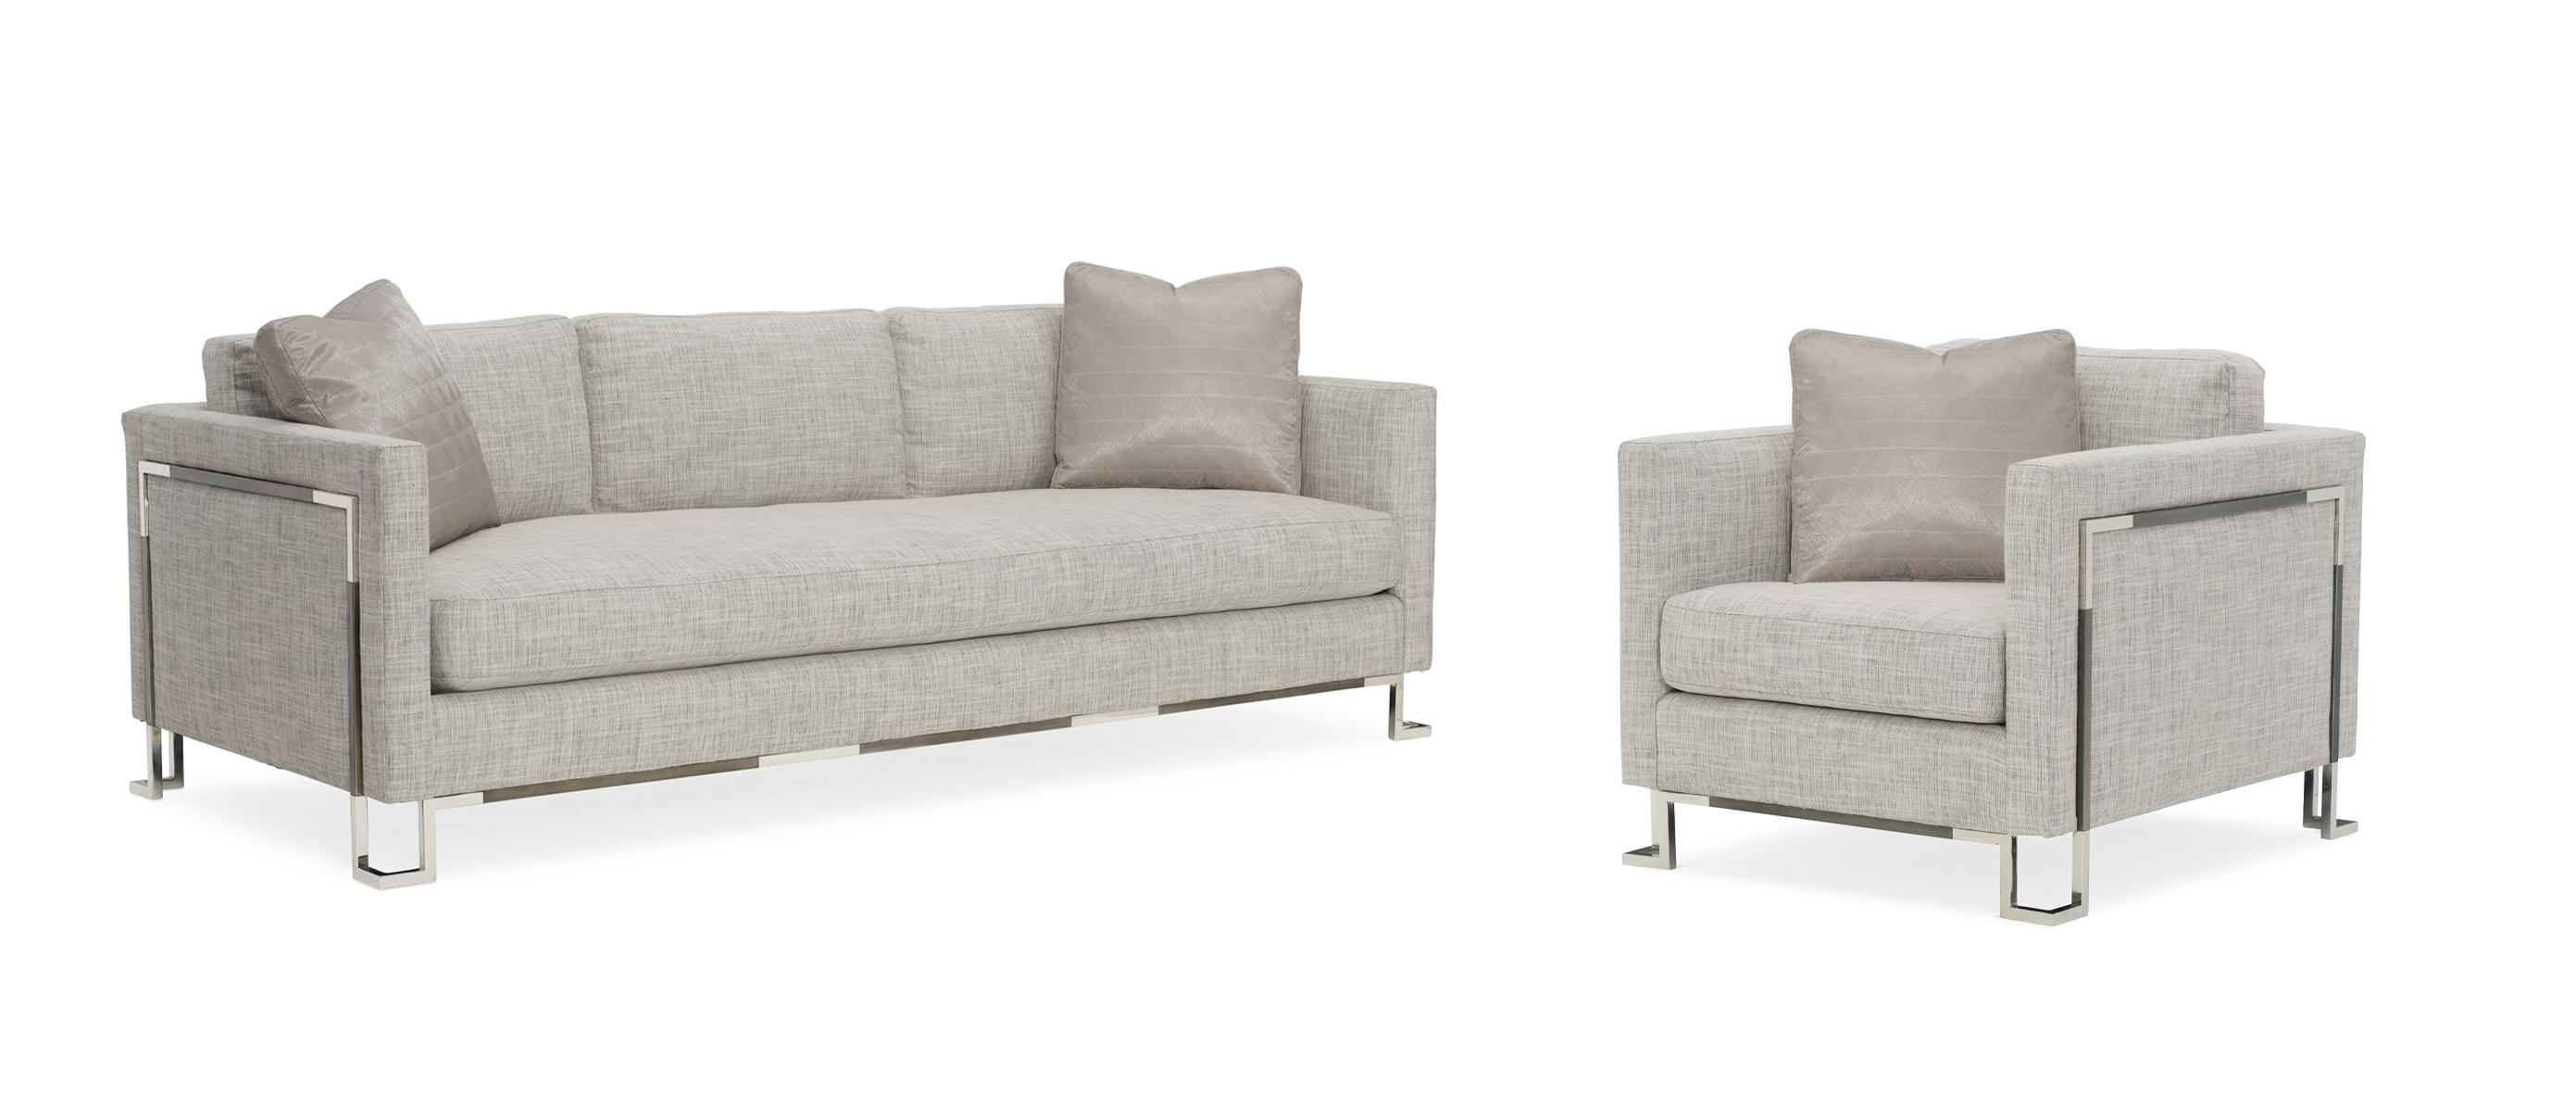 Contemporary Sofa and Chair OPEN FRAMEWORK M090-018-012-A-Set-2 in Light Gray, Brown Fabric